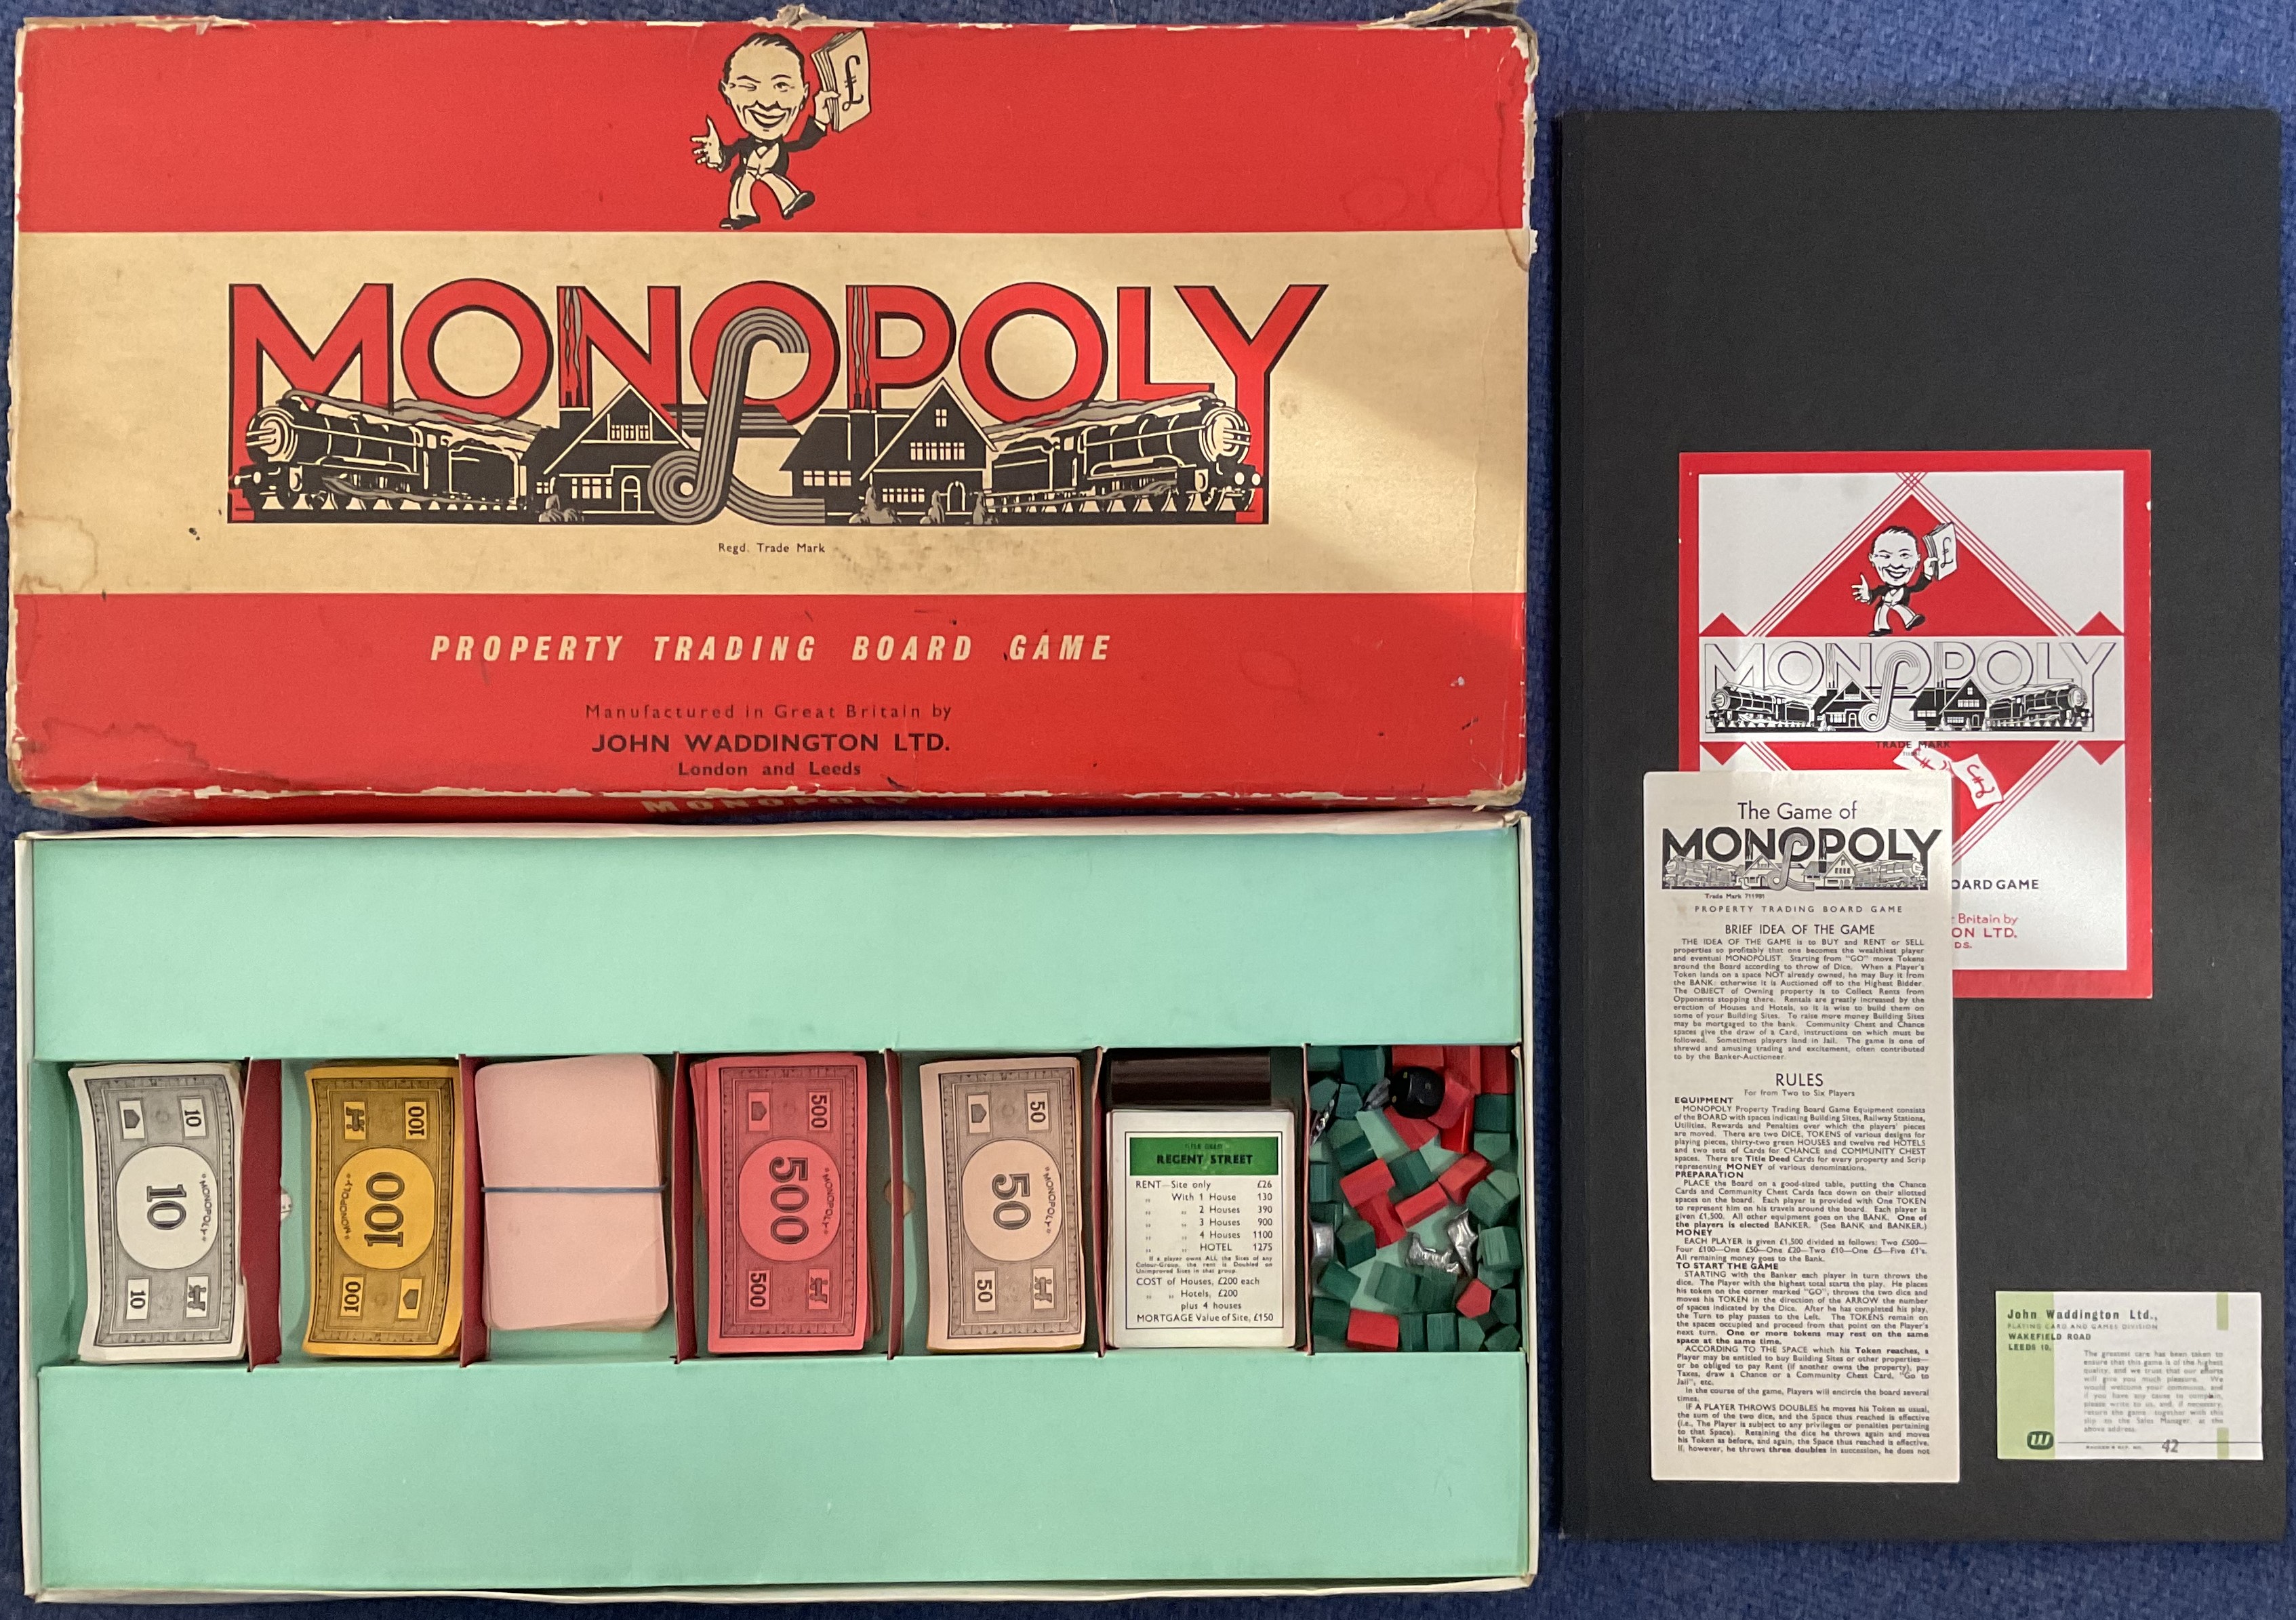 Monopoly Original UK Edition Board Game 1960s, appears complete and in its original packaging, outer